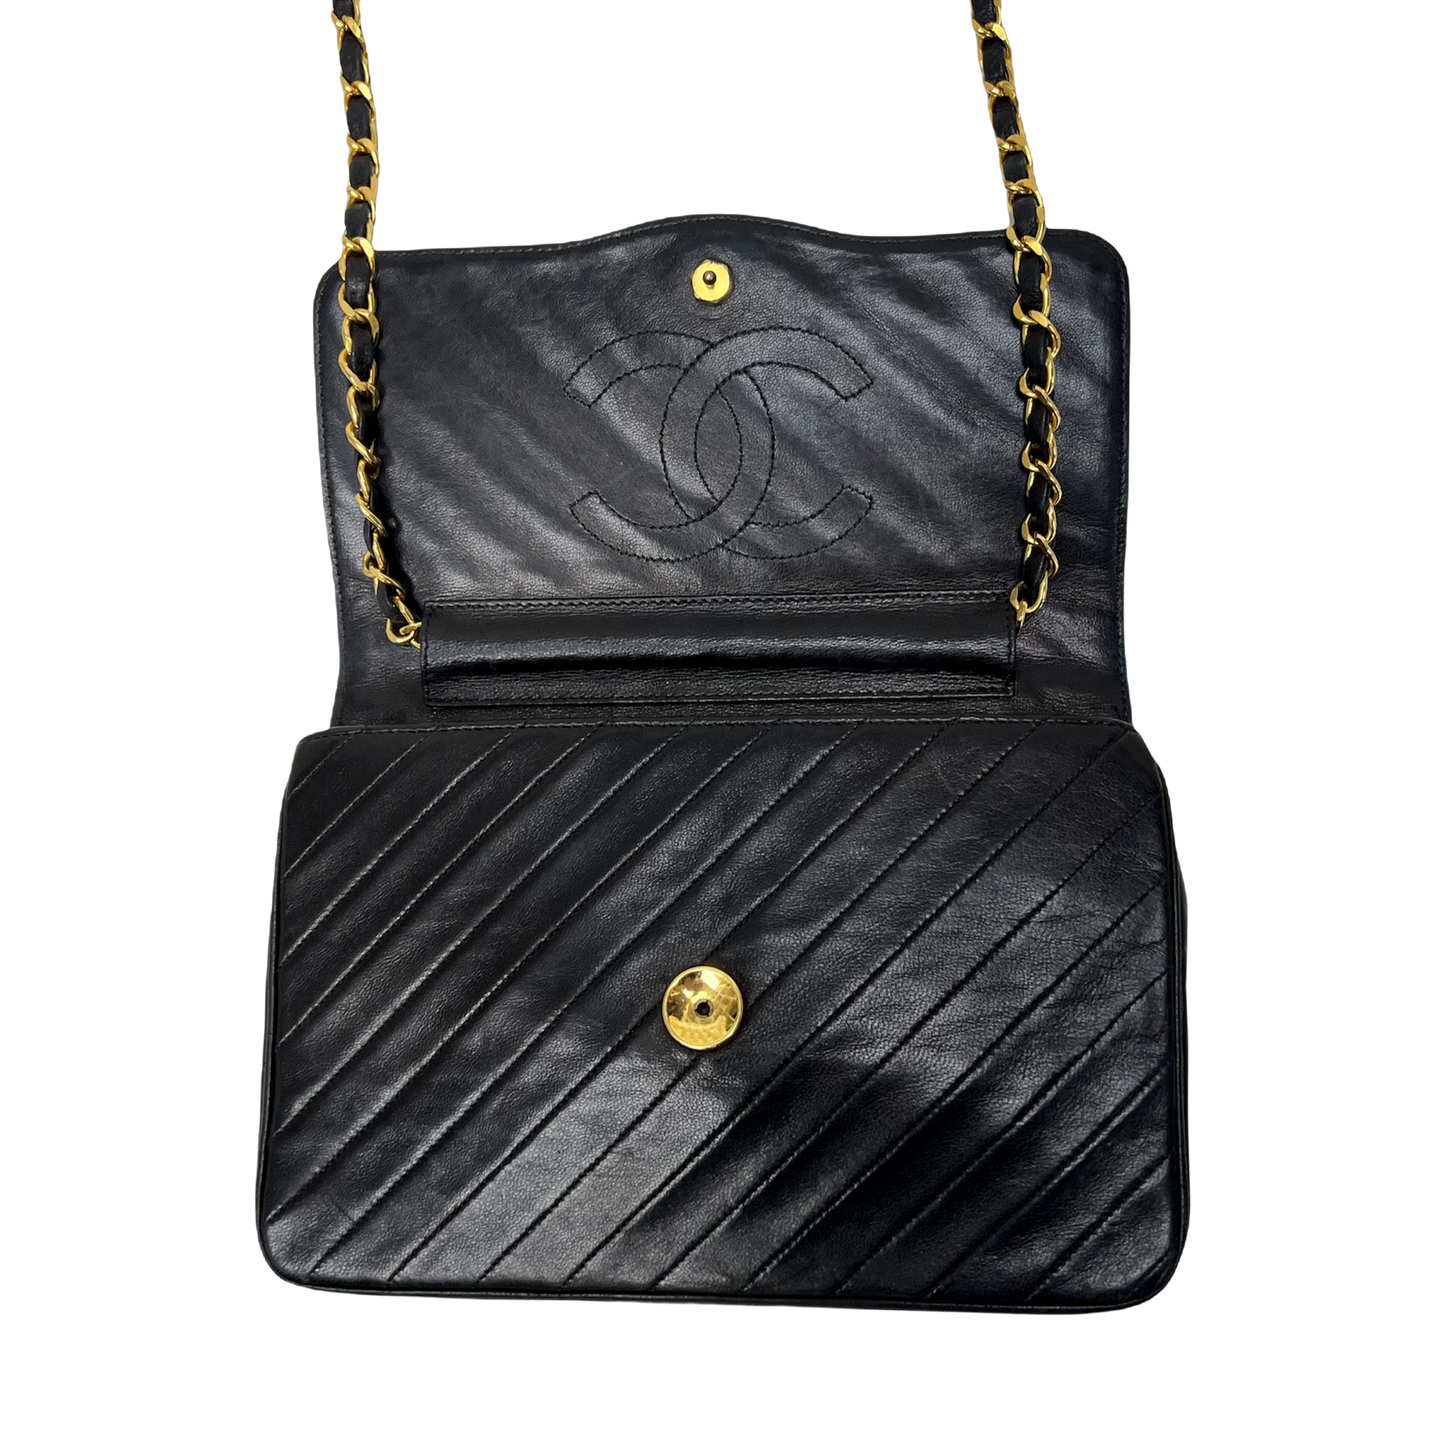 Chanel Lambskin Diagonal Quilted Flap Bag